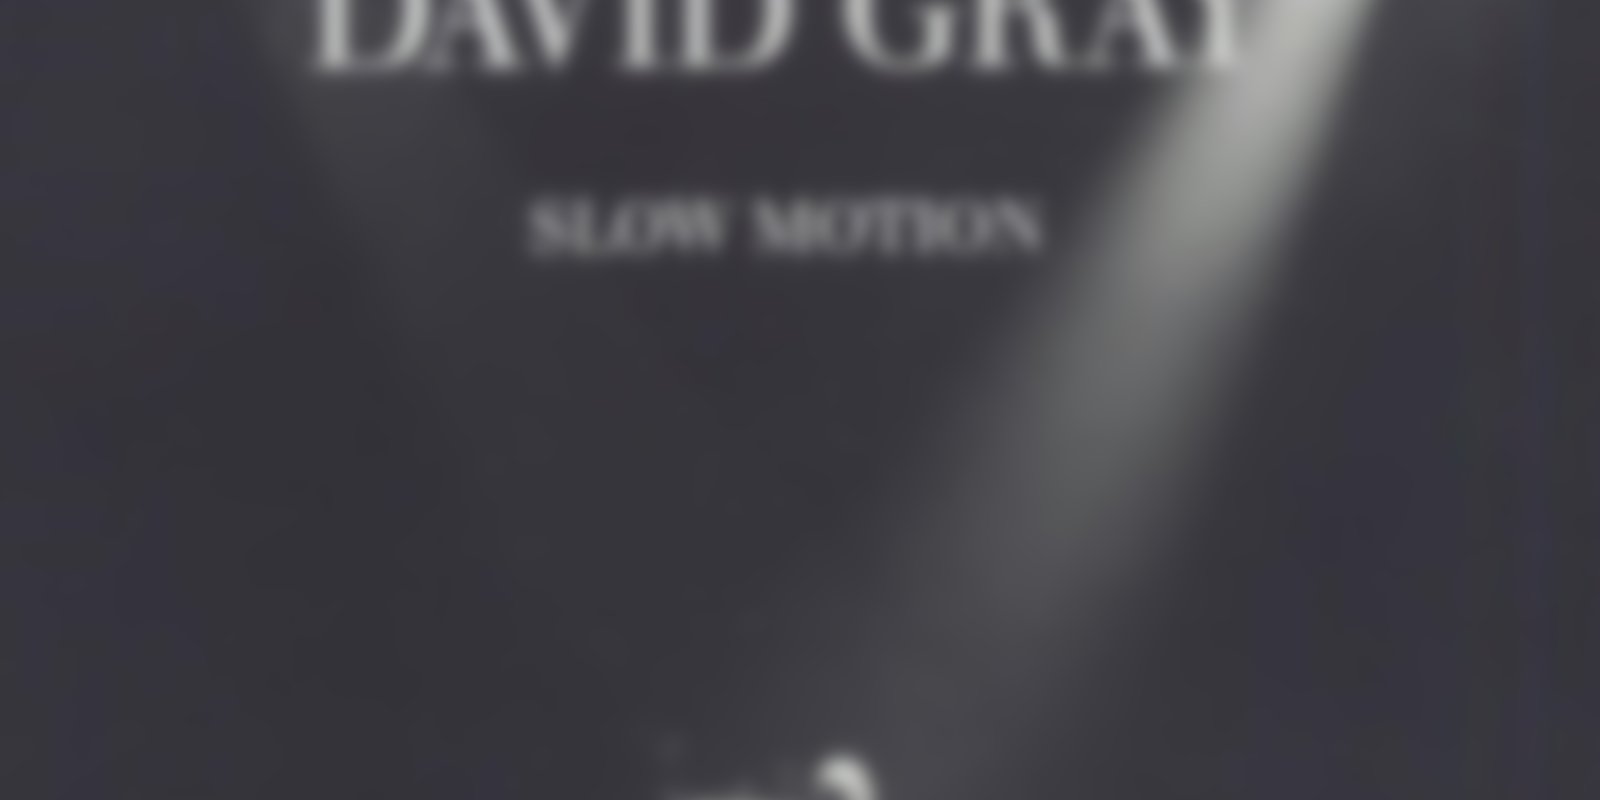 David Gray - Live in Slow Motion